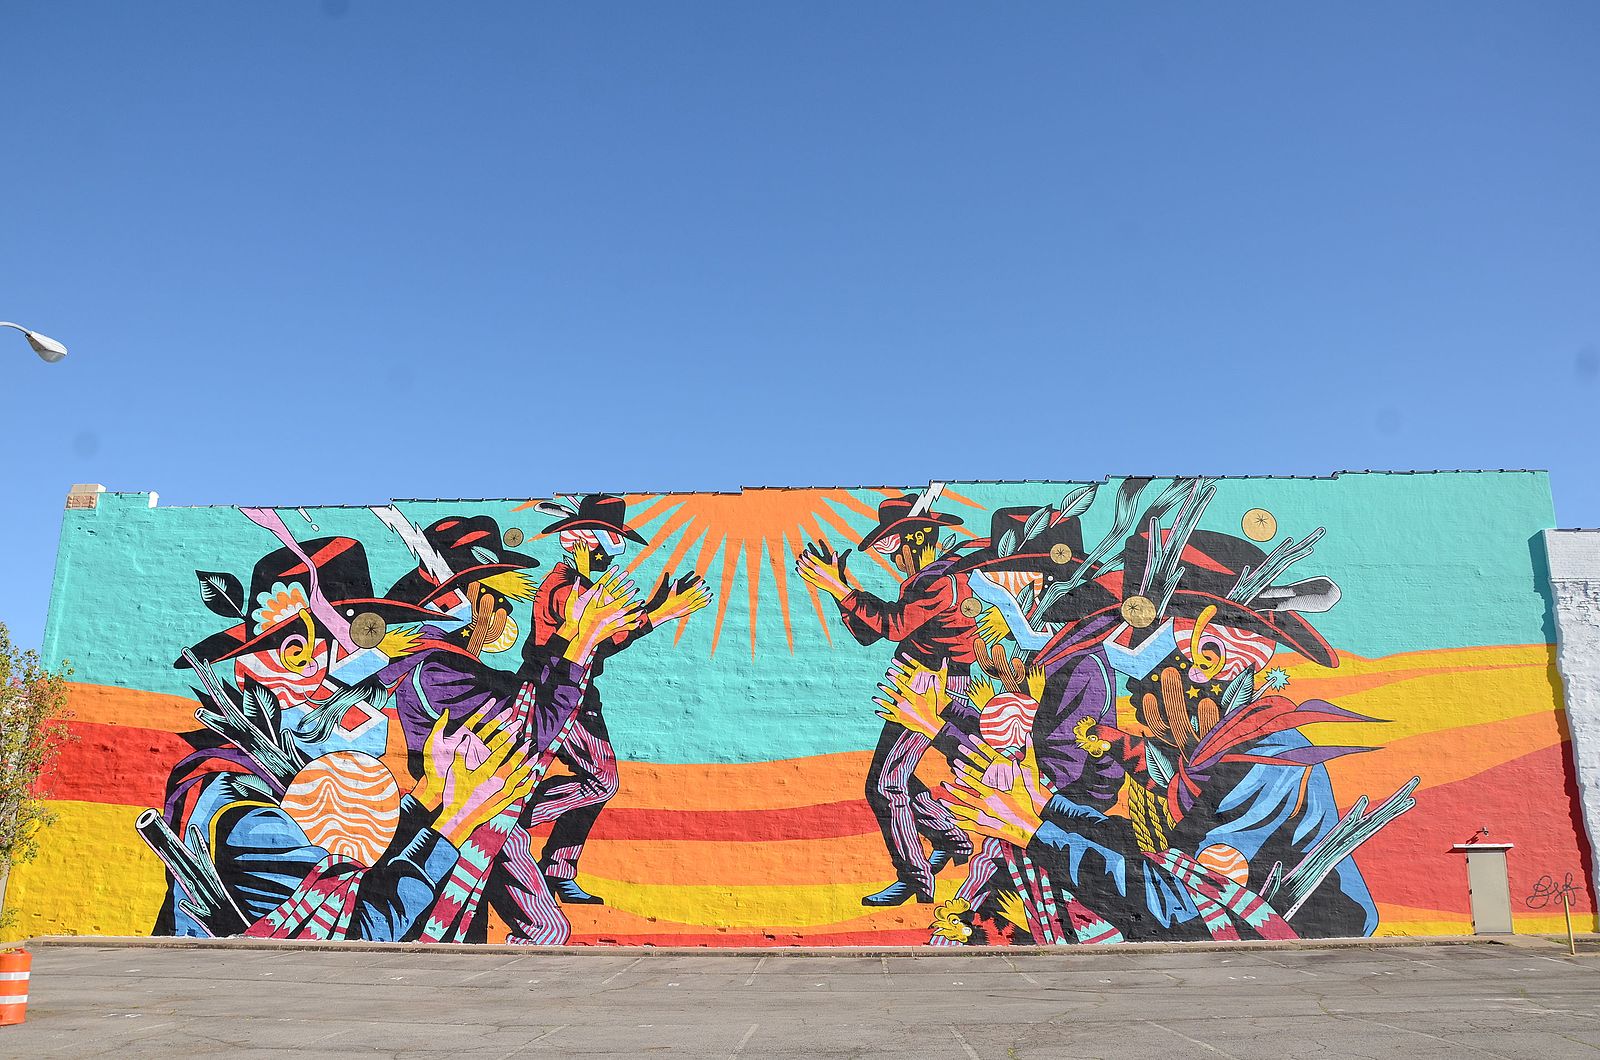  A mural painted as part of The Unexpected. (Source: Wikimedia Commons) 